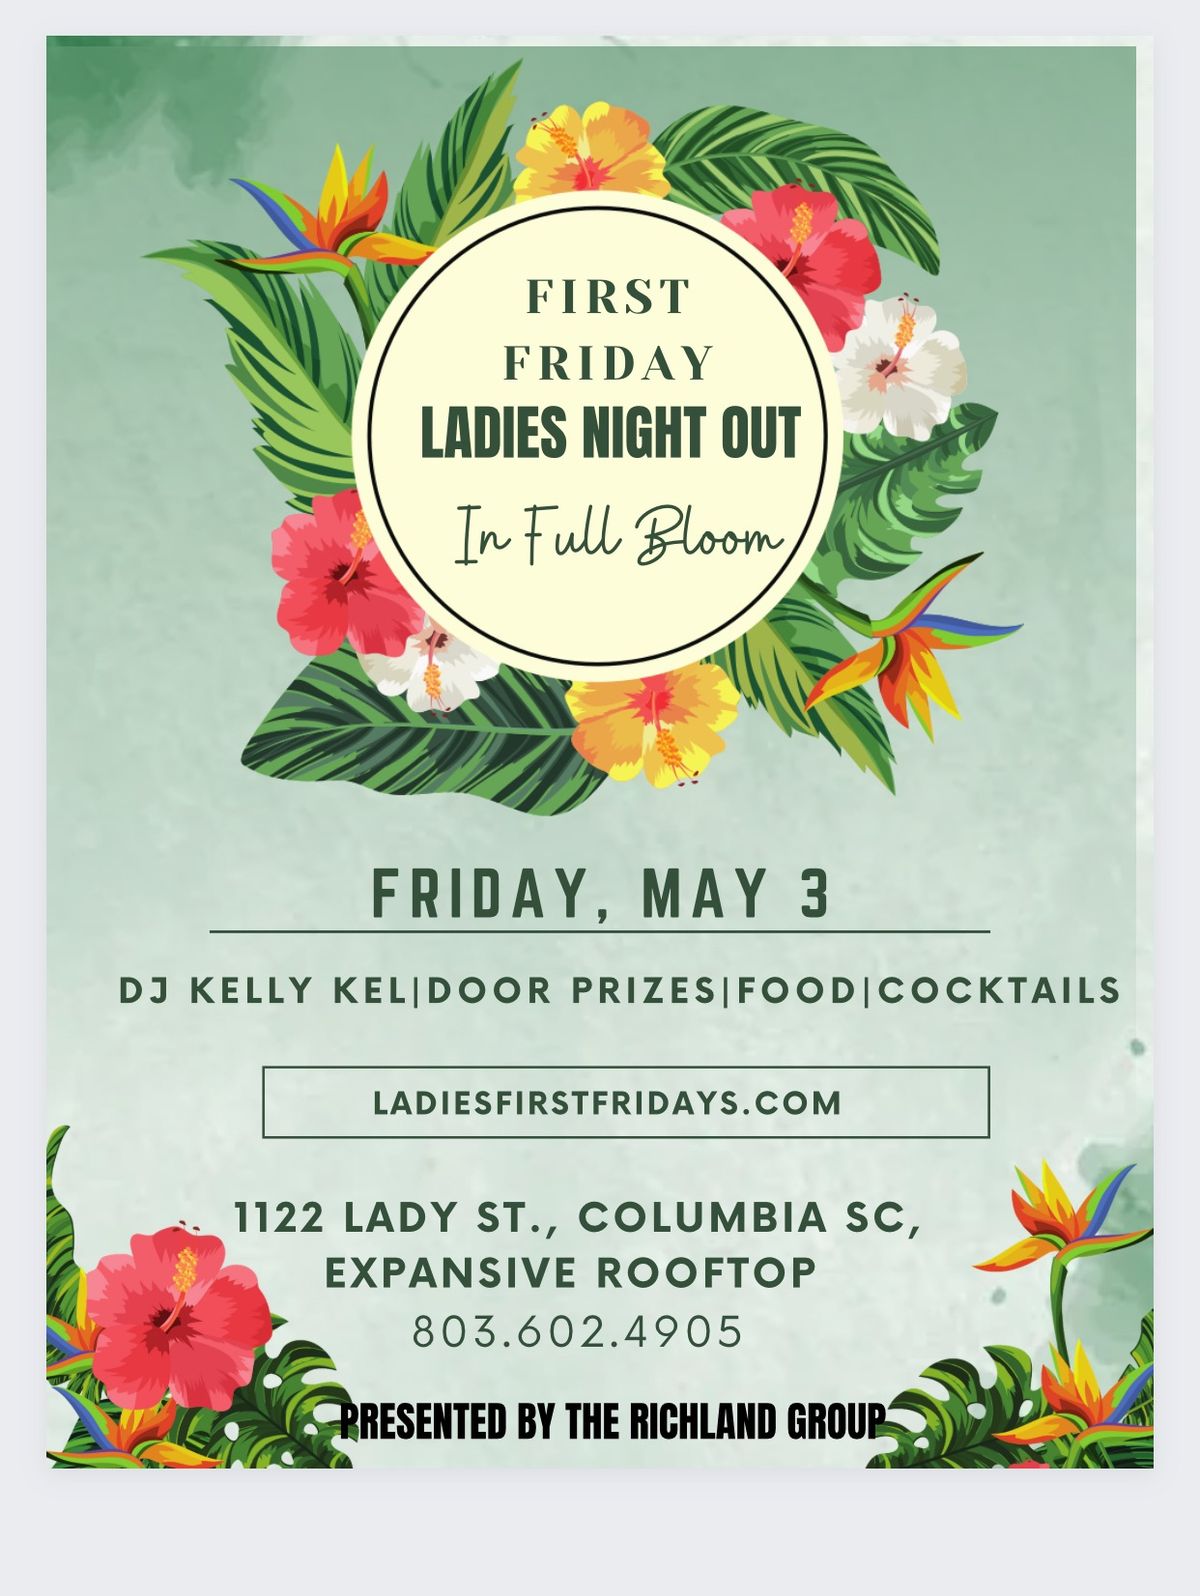 First Friday Ladies Night Out